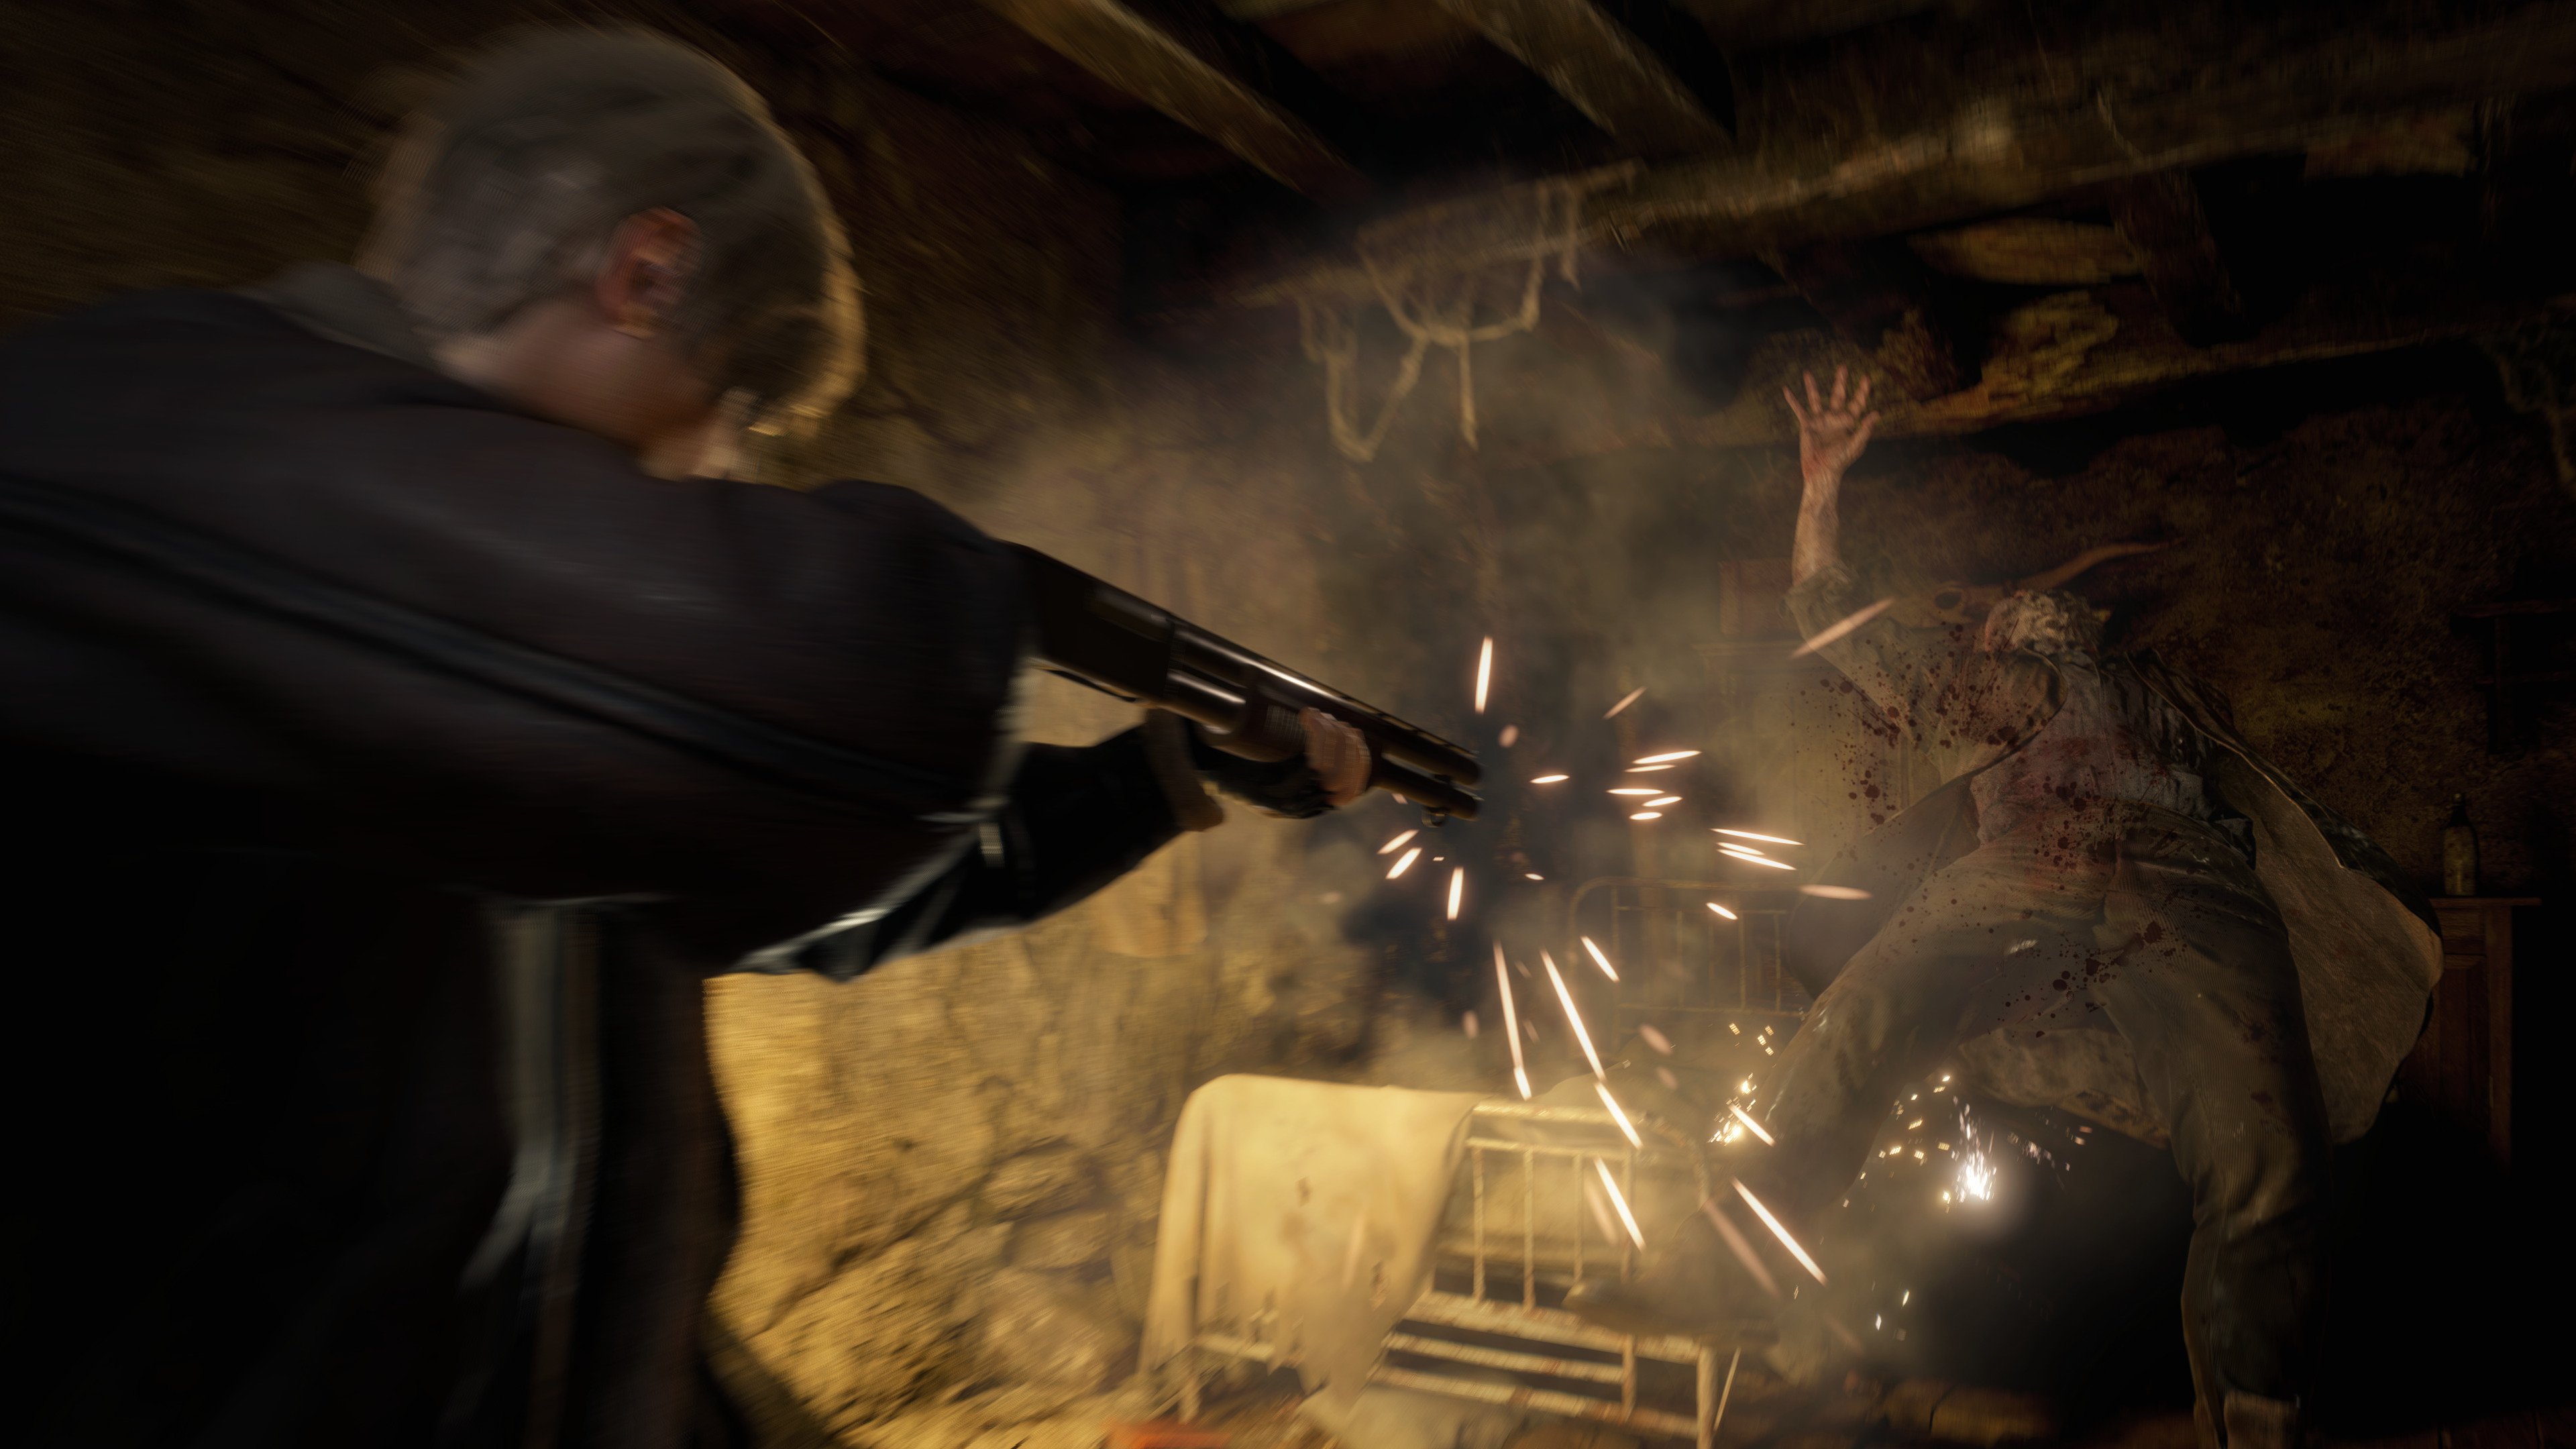 Resident Evil 2 Remake Could Be The Biggest Steam Game In The